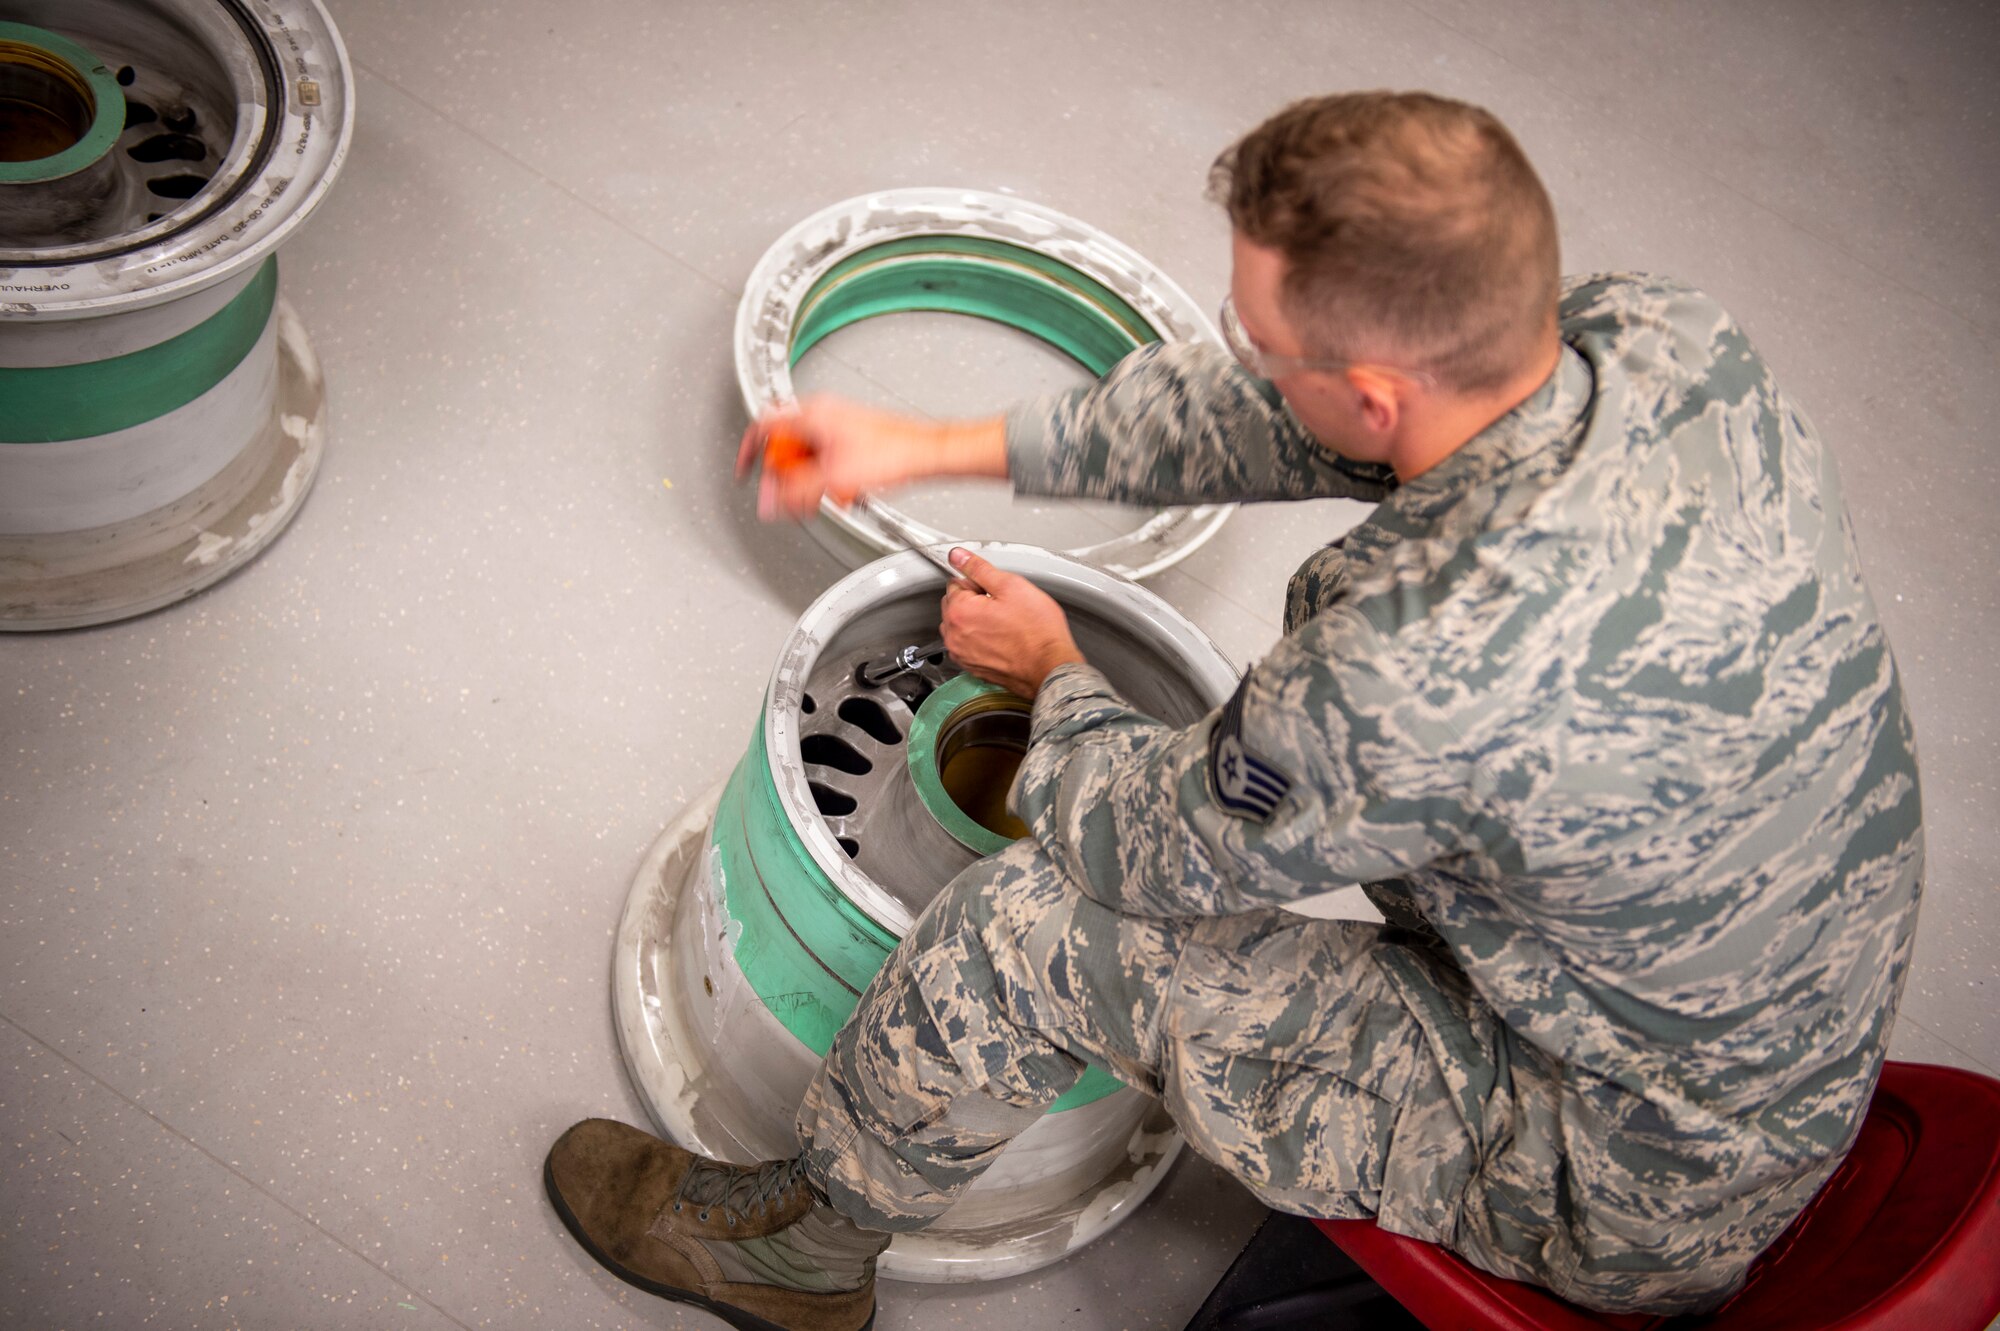 U.S. Air Force Staff Sgt. Logan Konigson, repair and reclamation specialist, 133rd Maintenance Squadron, disassembles a wheel assembly for refurbishment in St. Paul, Minn., Aug. 21, 2020.